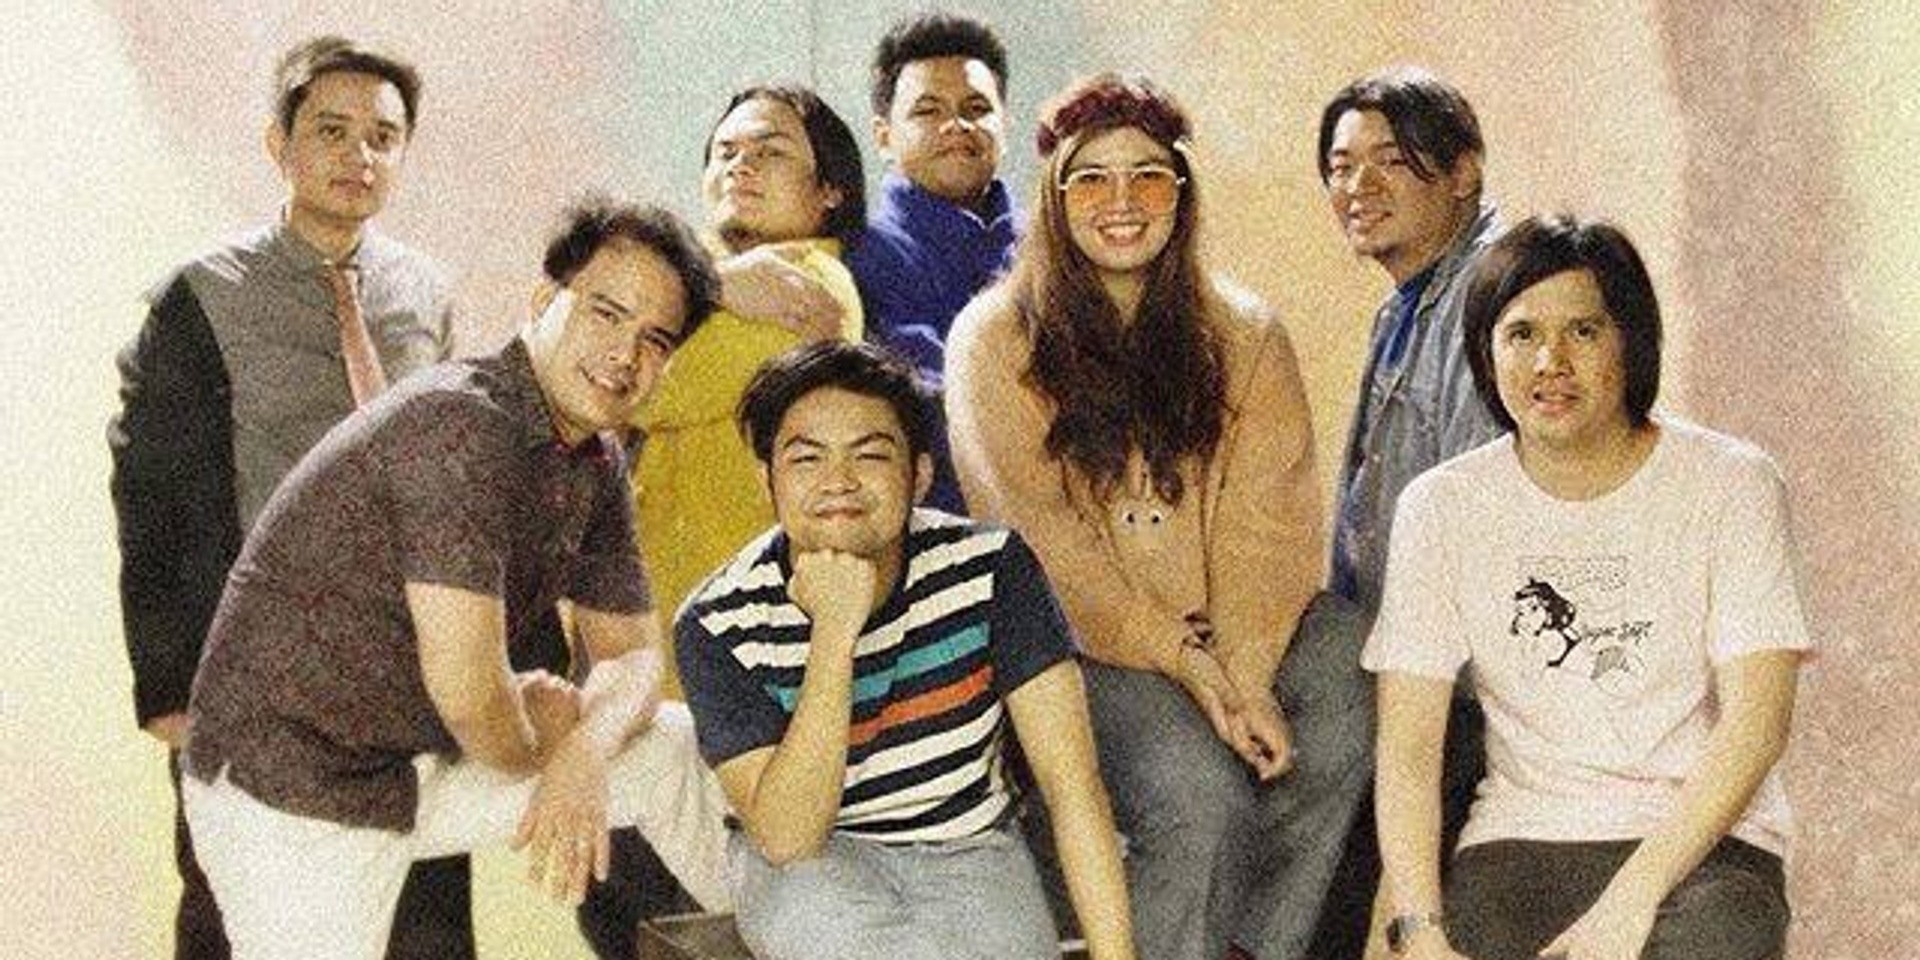 Diego and Jao Mapa star in Autotelic's new music video – watch